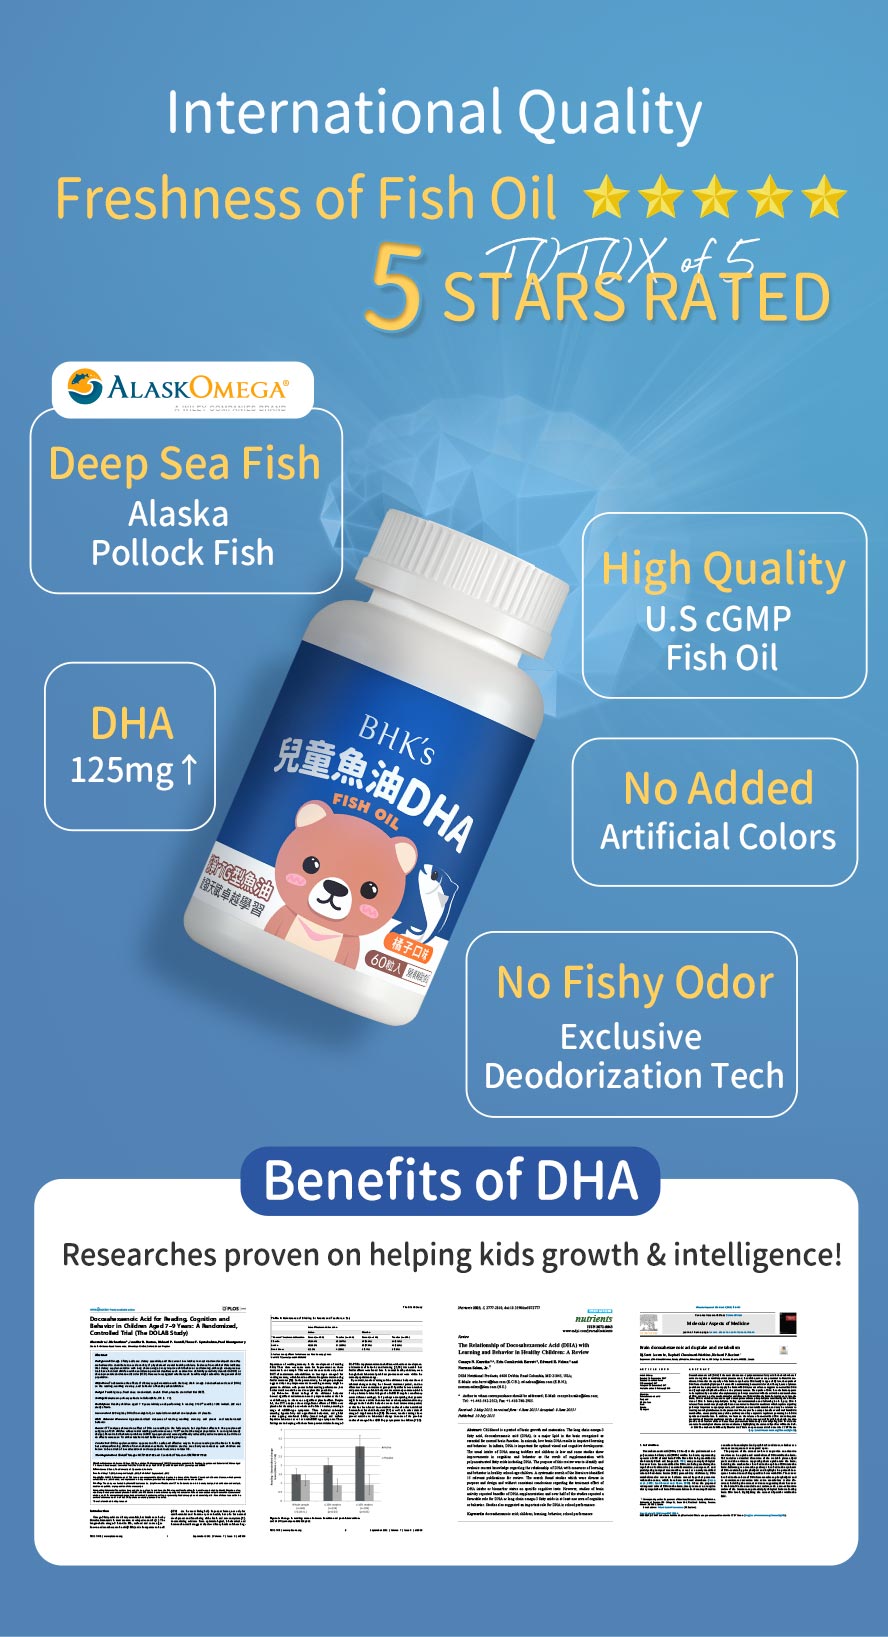 Carefully selected DHA with rTG type, easy to absorb, fulfil TOTOX standardization, with no fishy taste, no colorant, and easy to chew softgel to supplement kids needs without any hustle